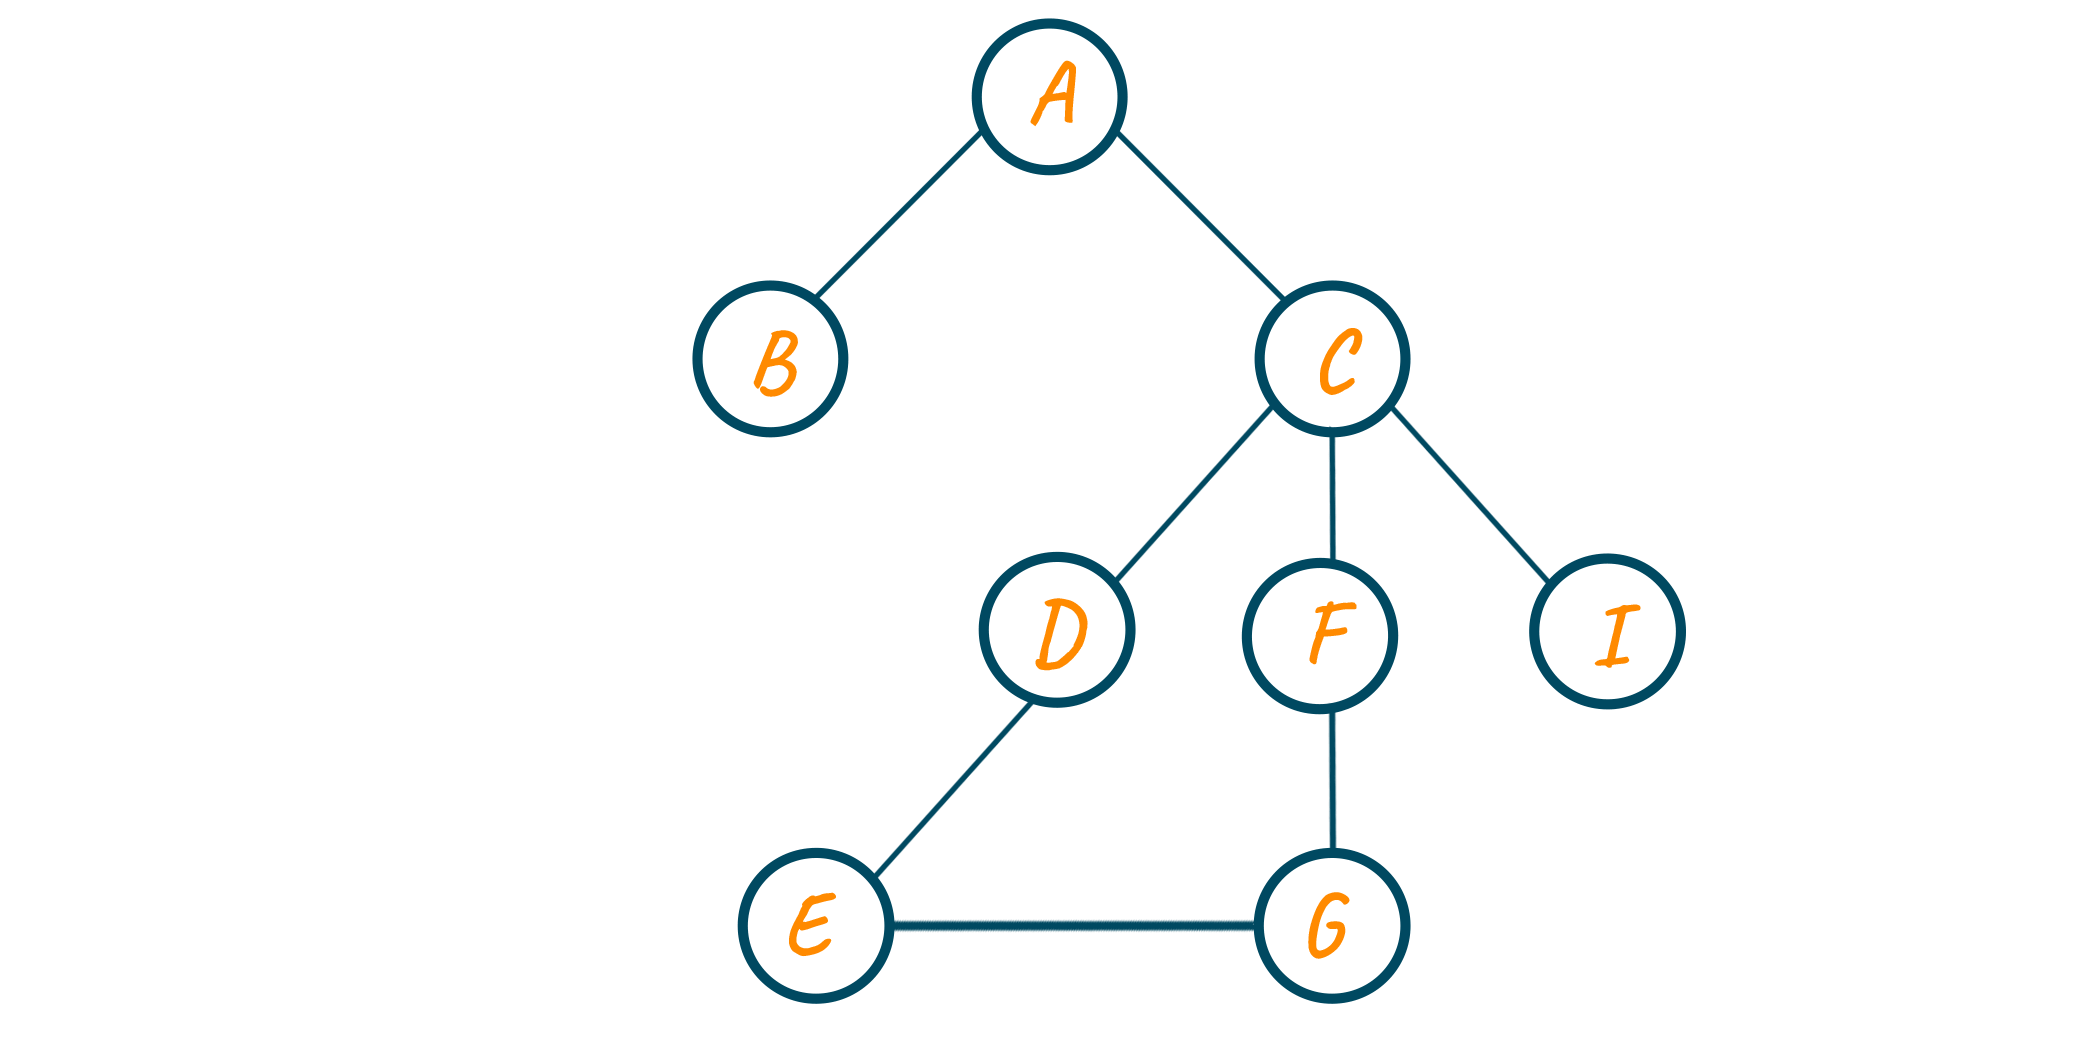 Graph with cycle C-D-E-G-F-C